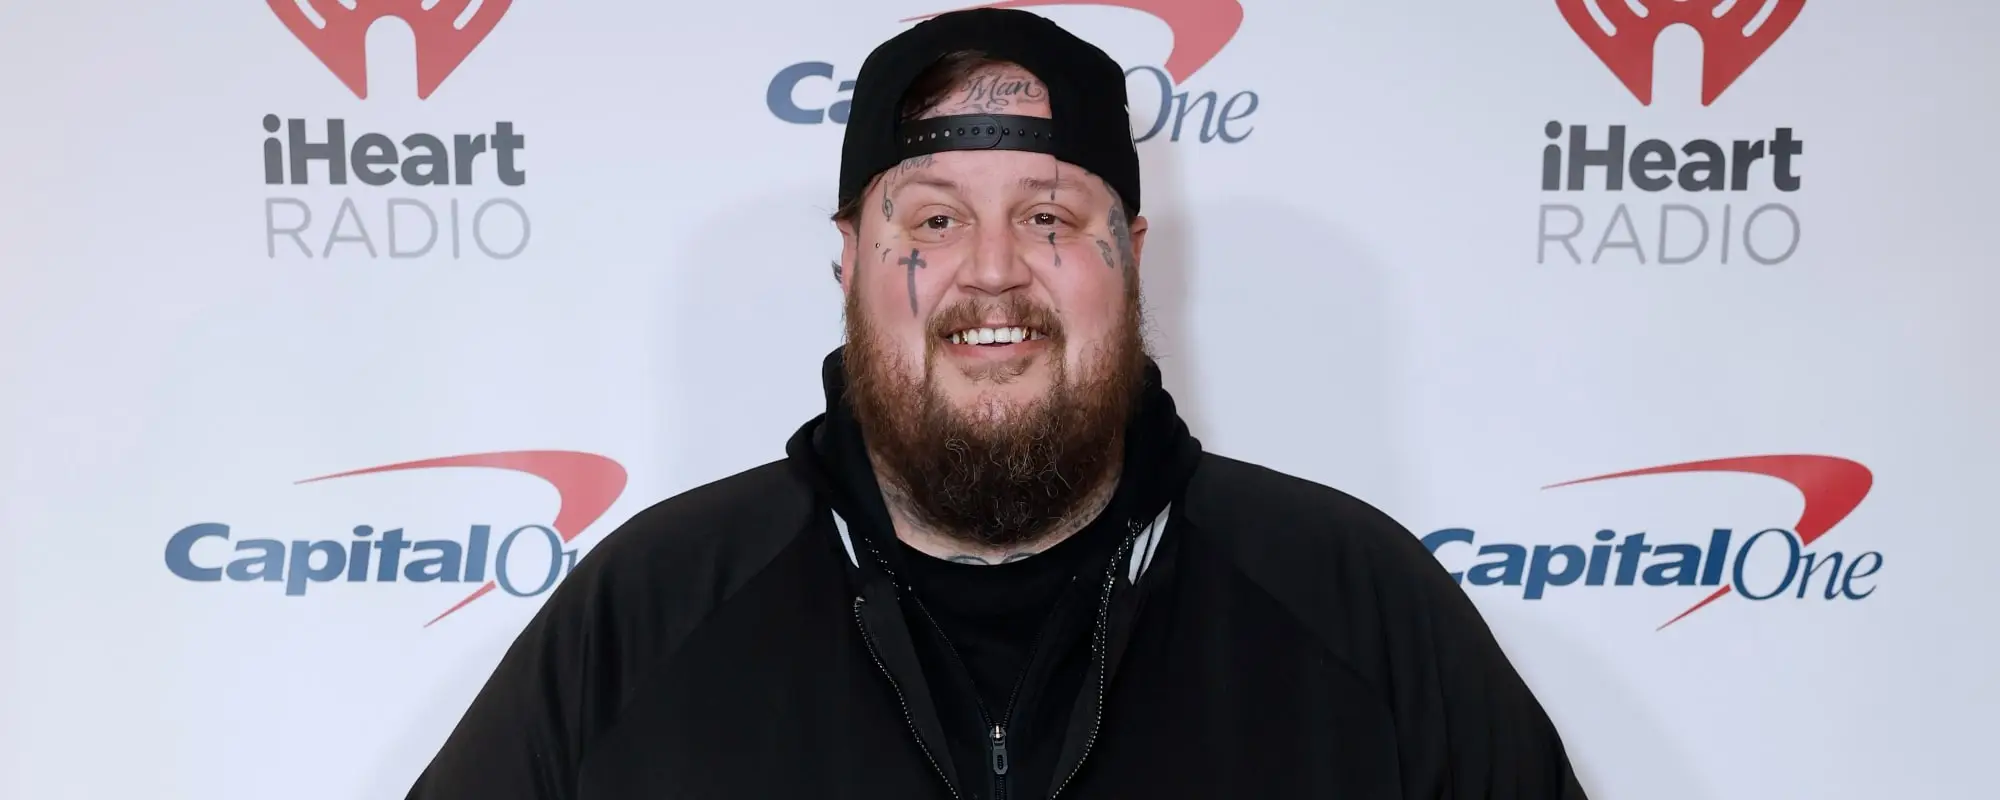 Watch Jelly Roll Learn the Explicit Meaning Behind His Name in Hilarious Clip